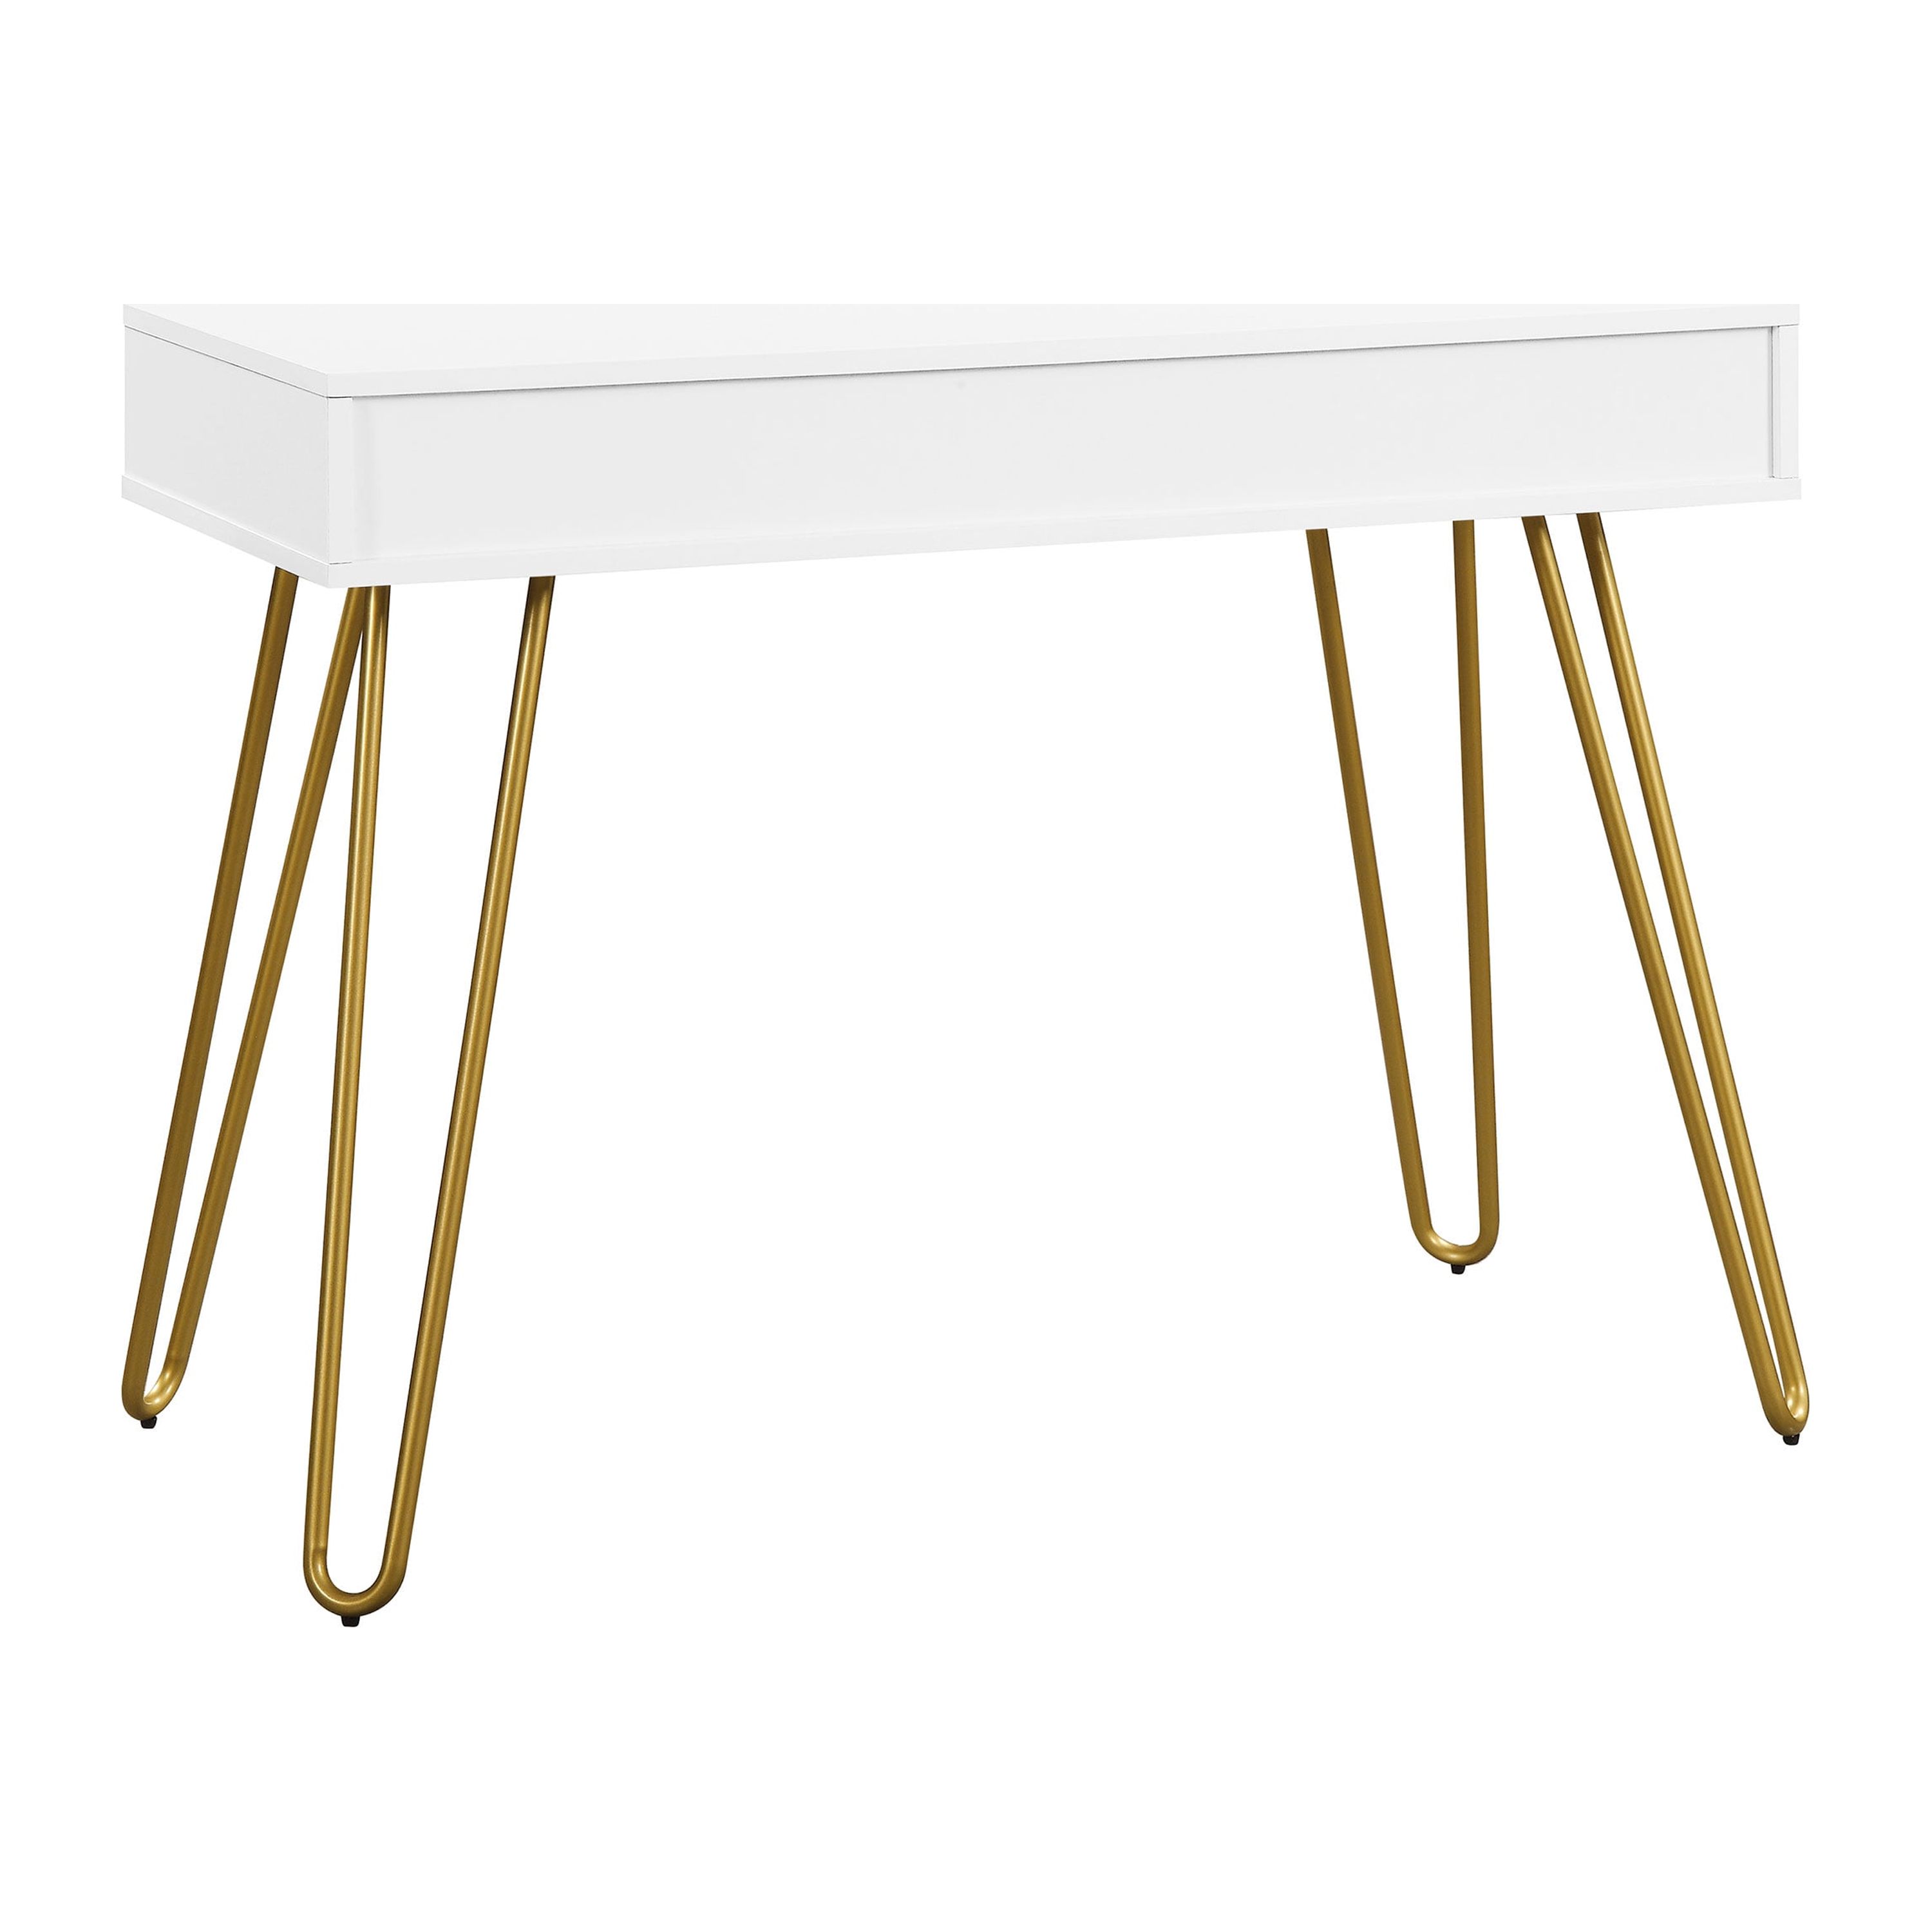 Mainstays Hairpin Writing Desk, Multiple Finishes - image 5 of 10